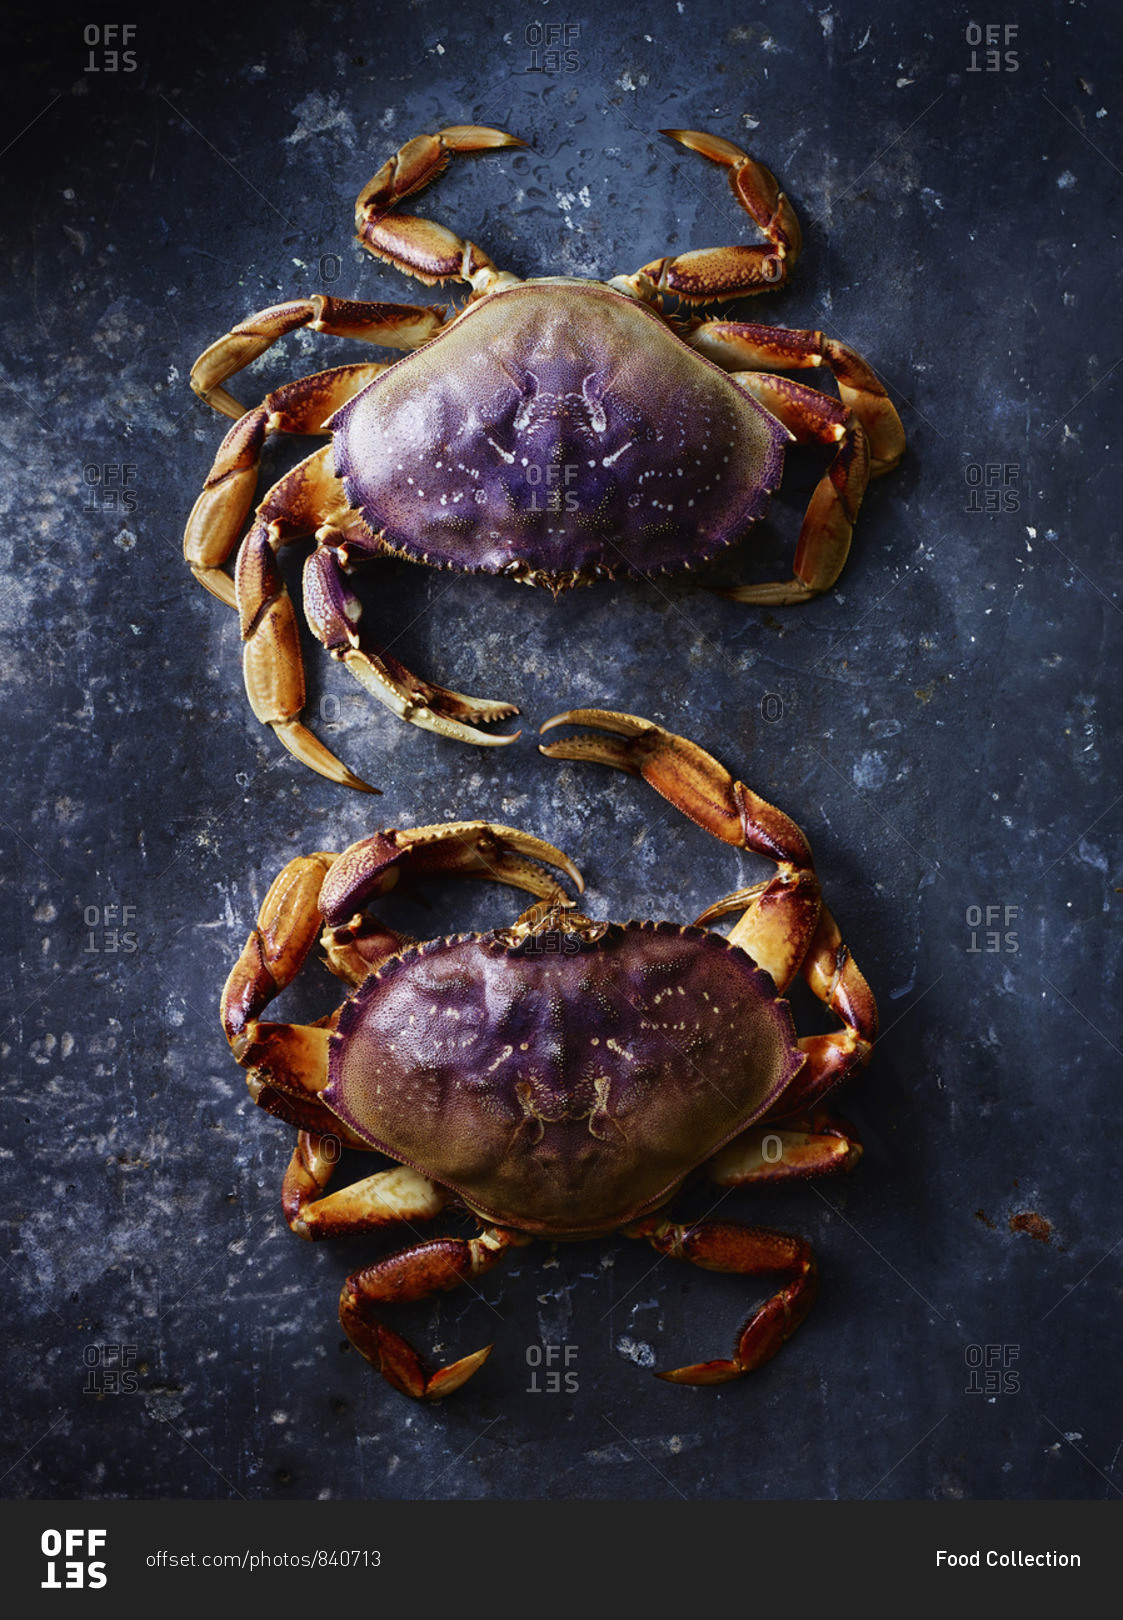 Two crabs on a black background